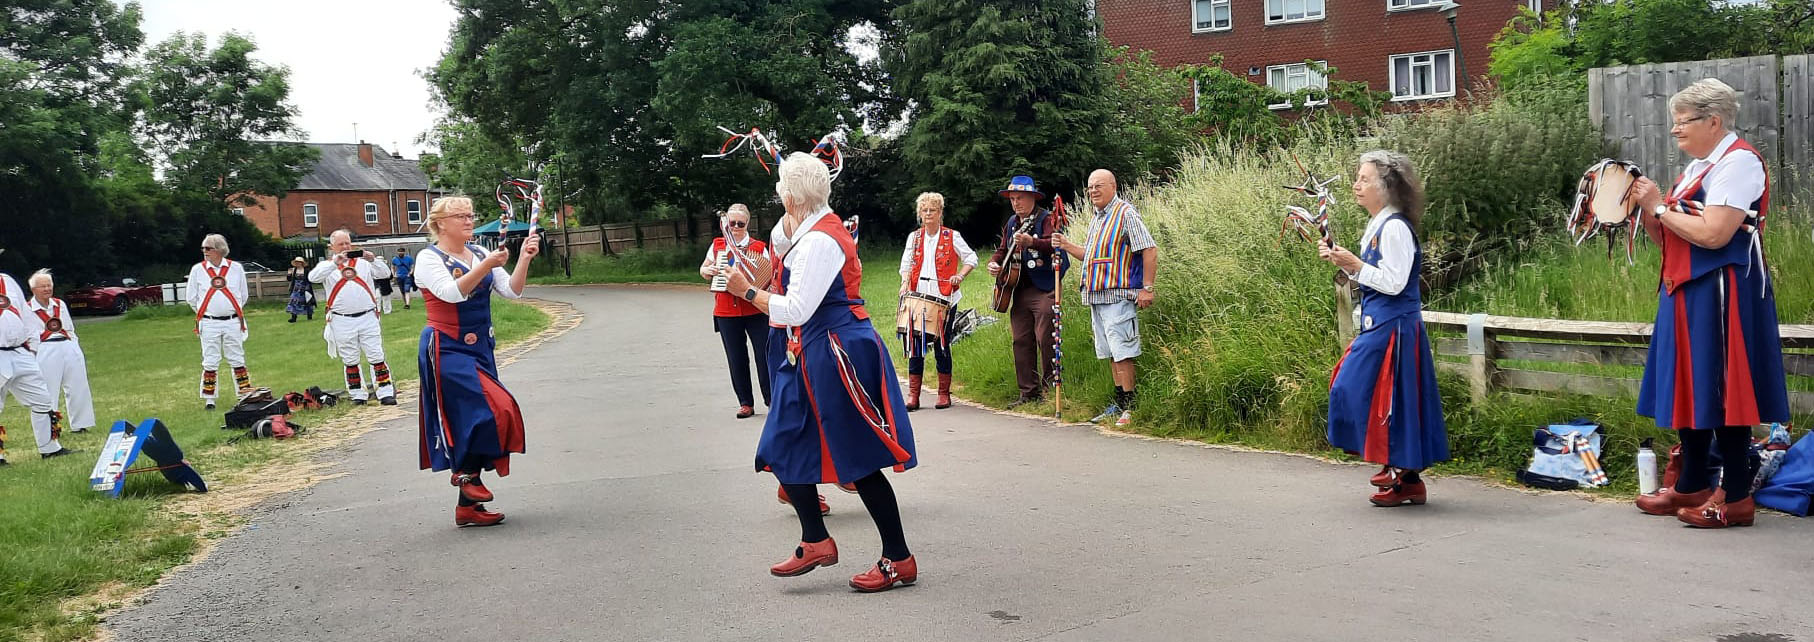 nancy butterfly dancing and being watched by White Hart Morris men